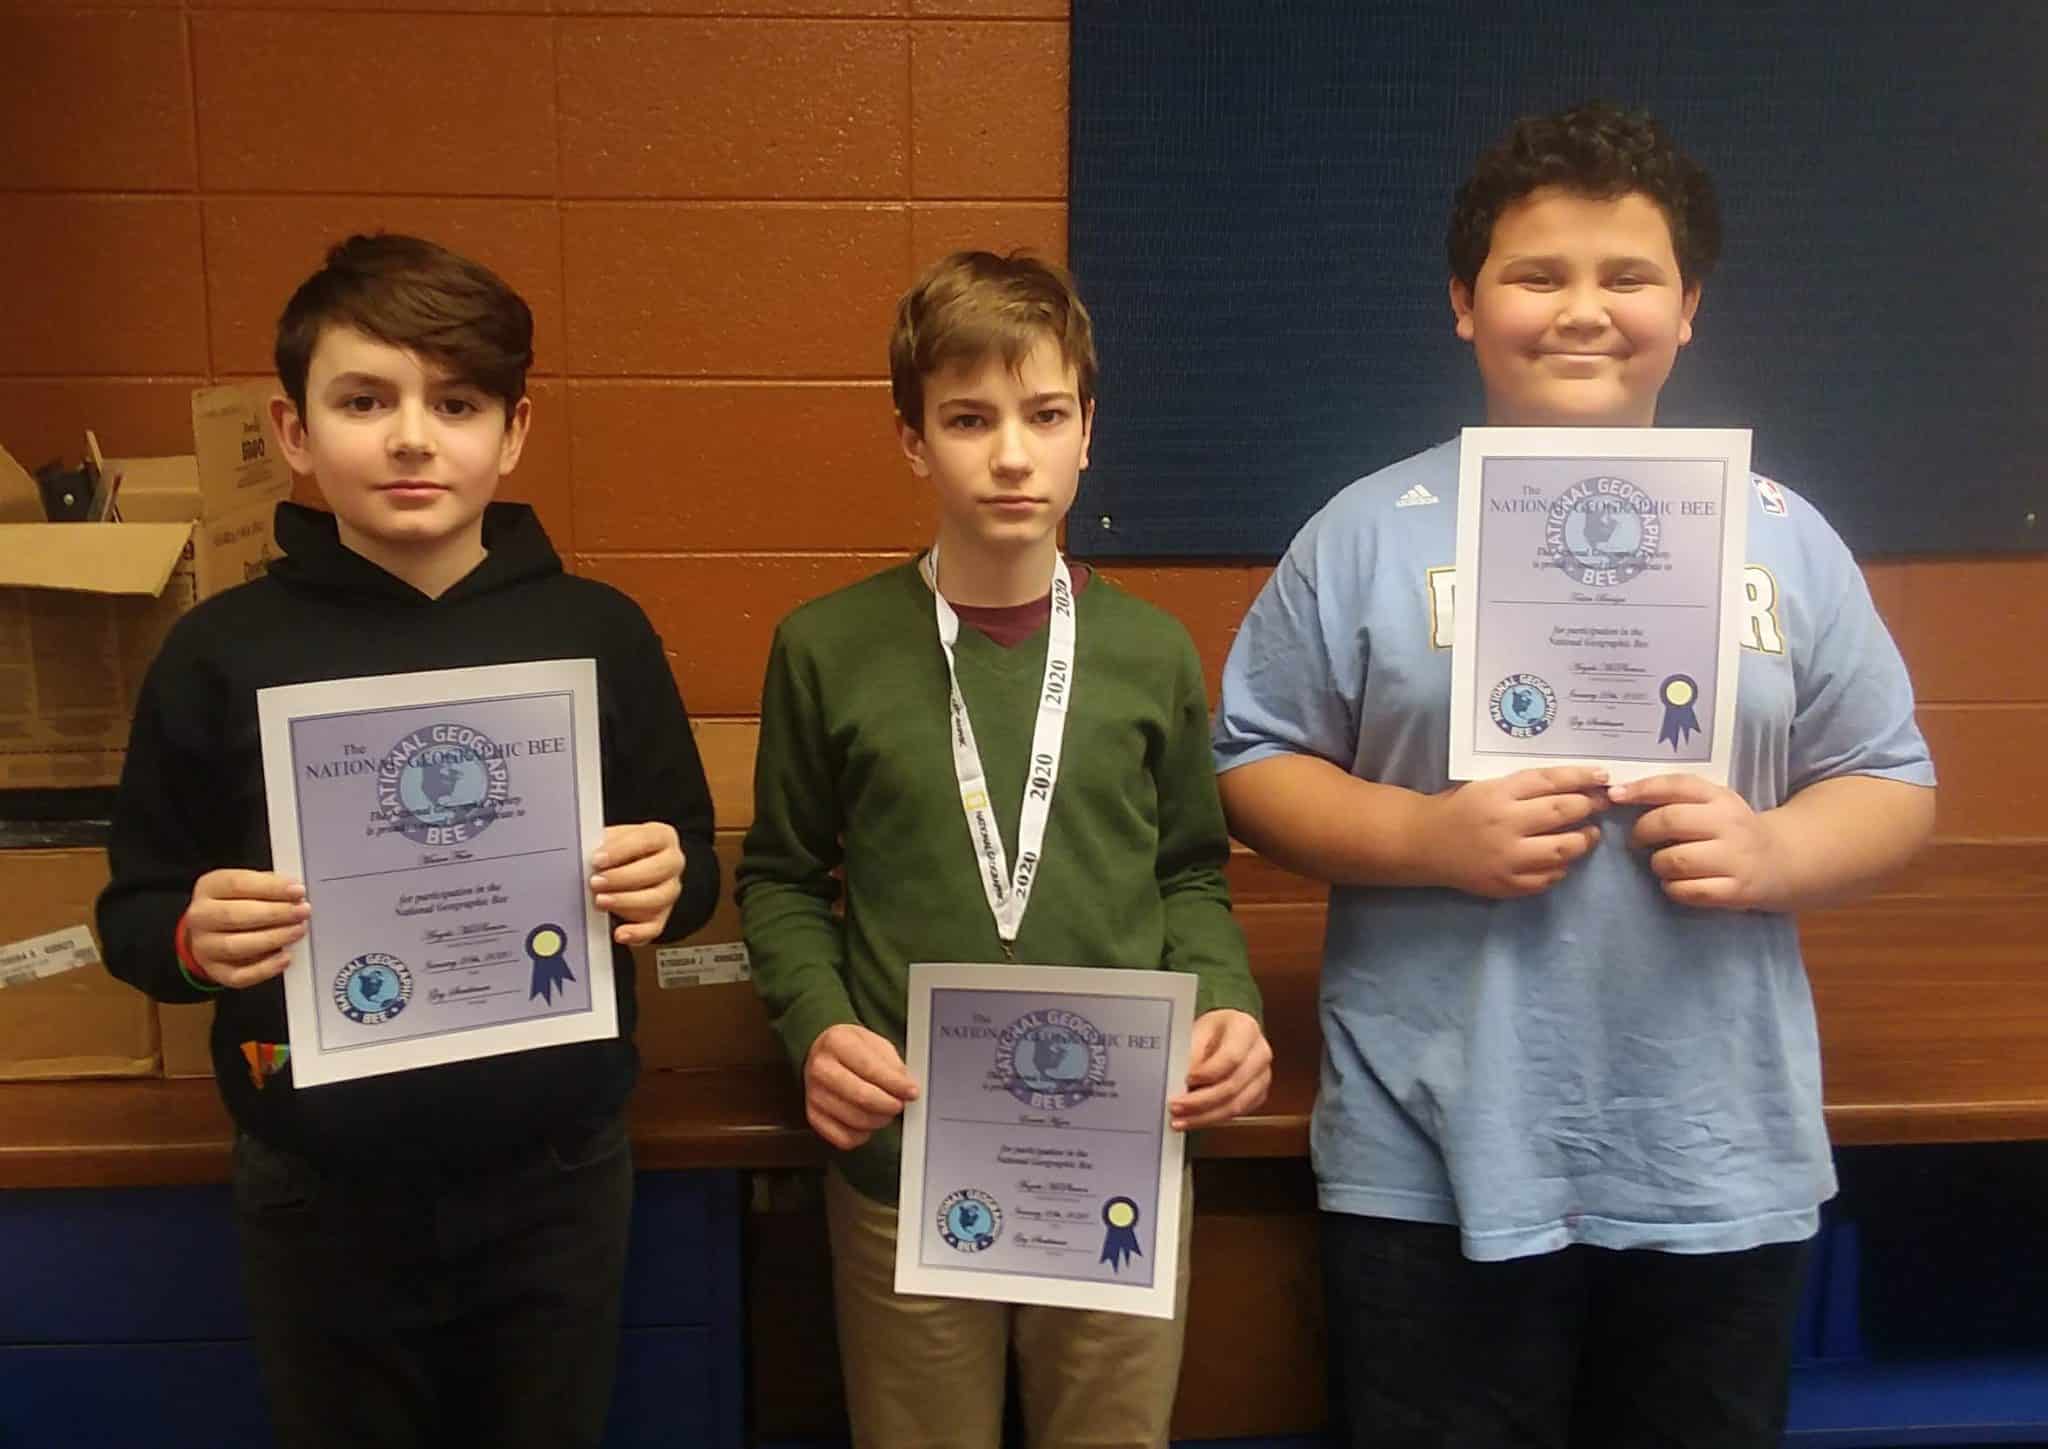 Tomahawk students take part in National Geographic GeoBee